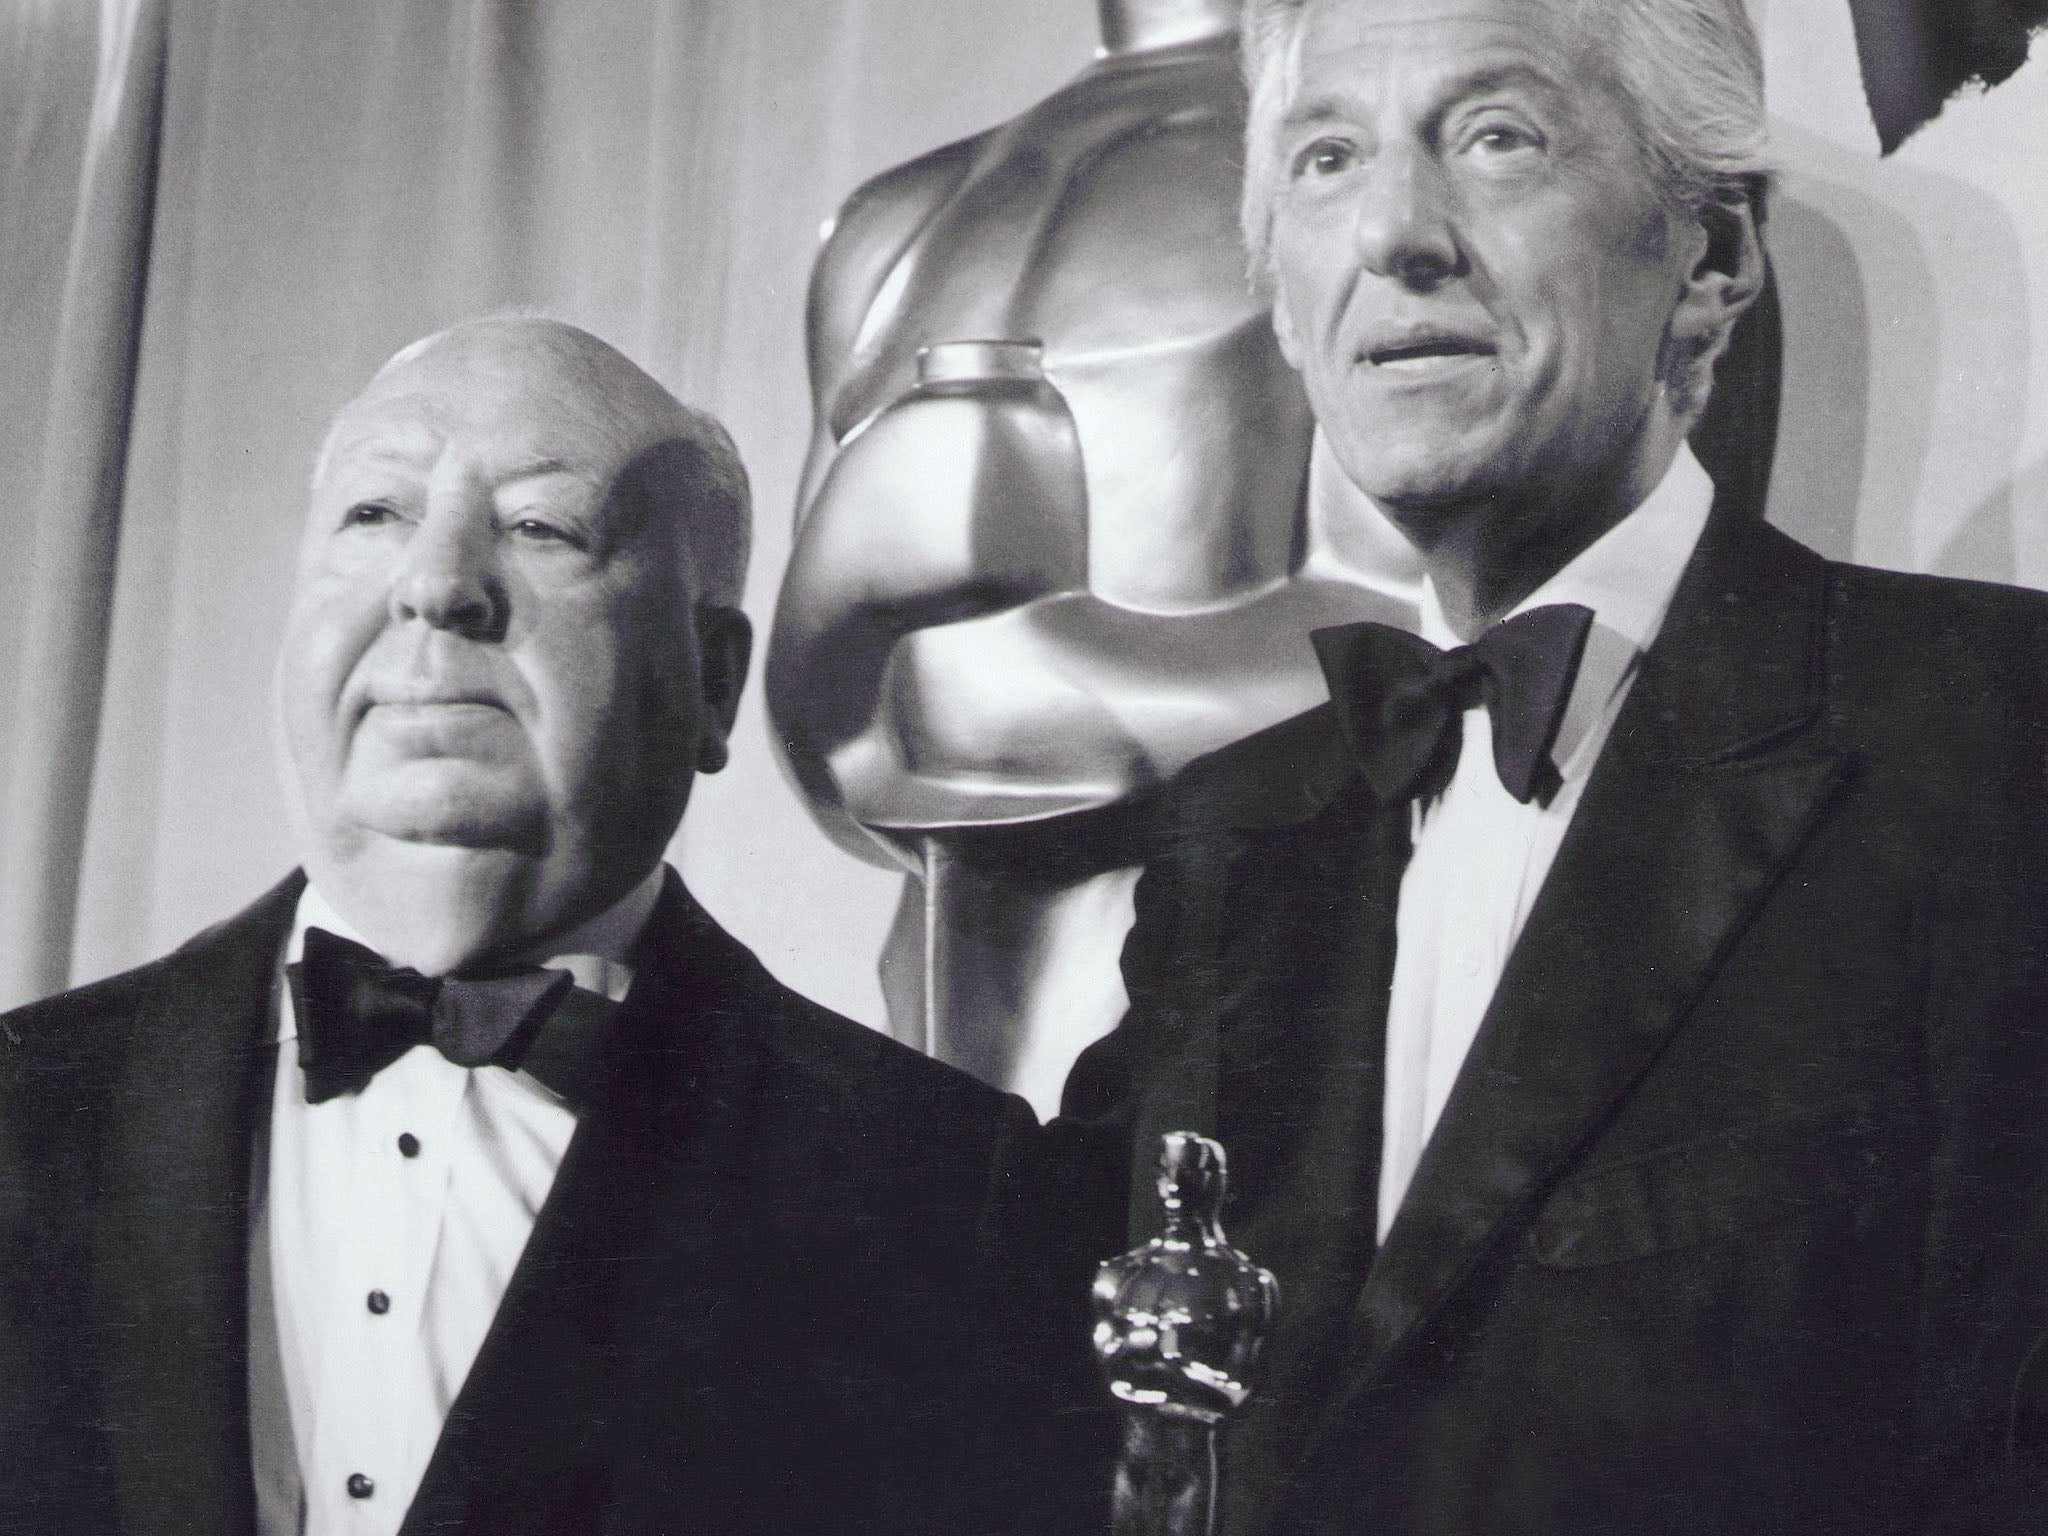 Hitchcock was feted with four Oscar nods in his lifetime but only took home one